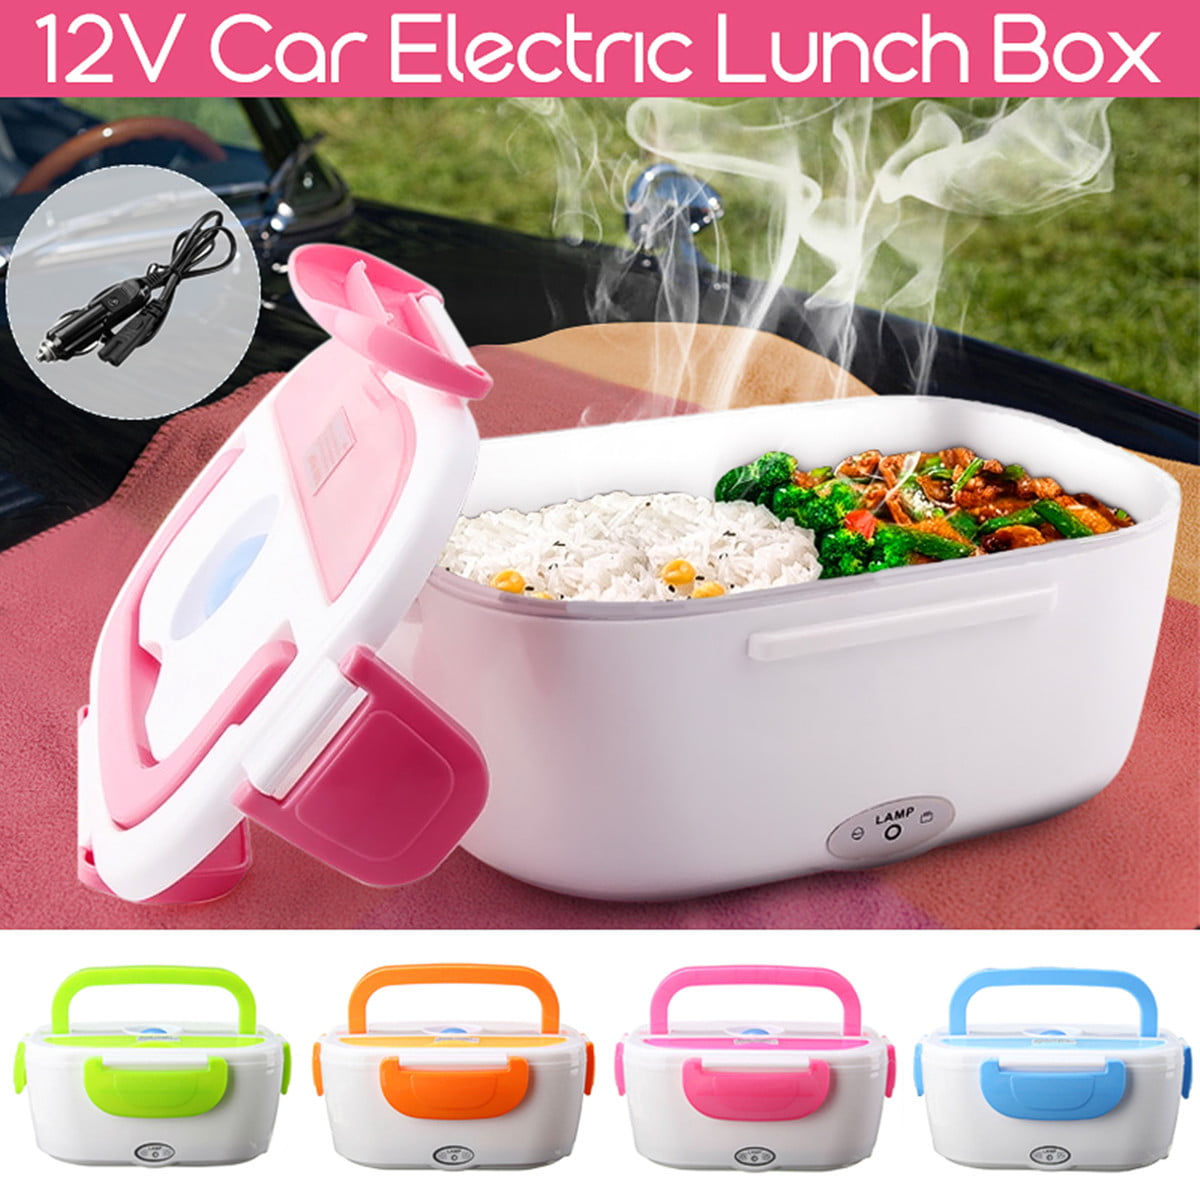 12V/110V Portable Electric Heated Food Warmer Container Lunch Meal Lunchbox US 